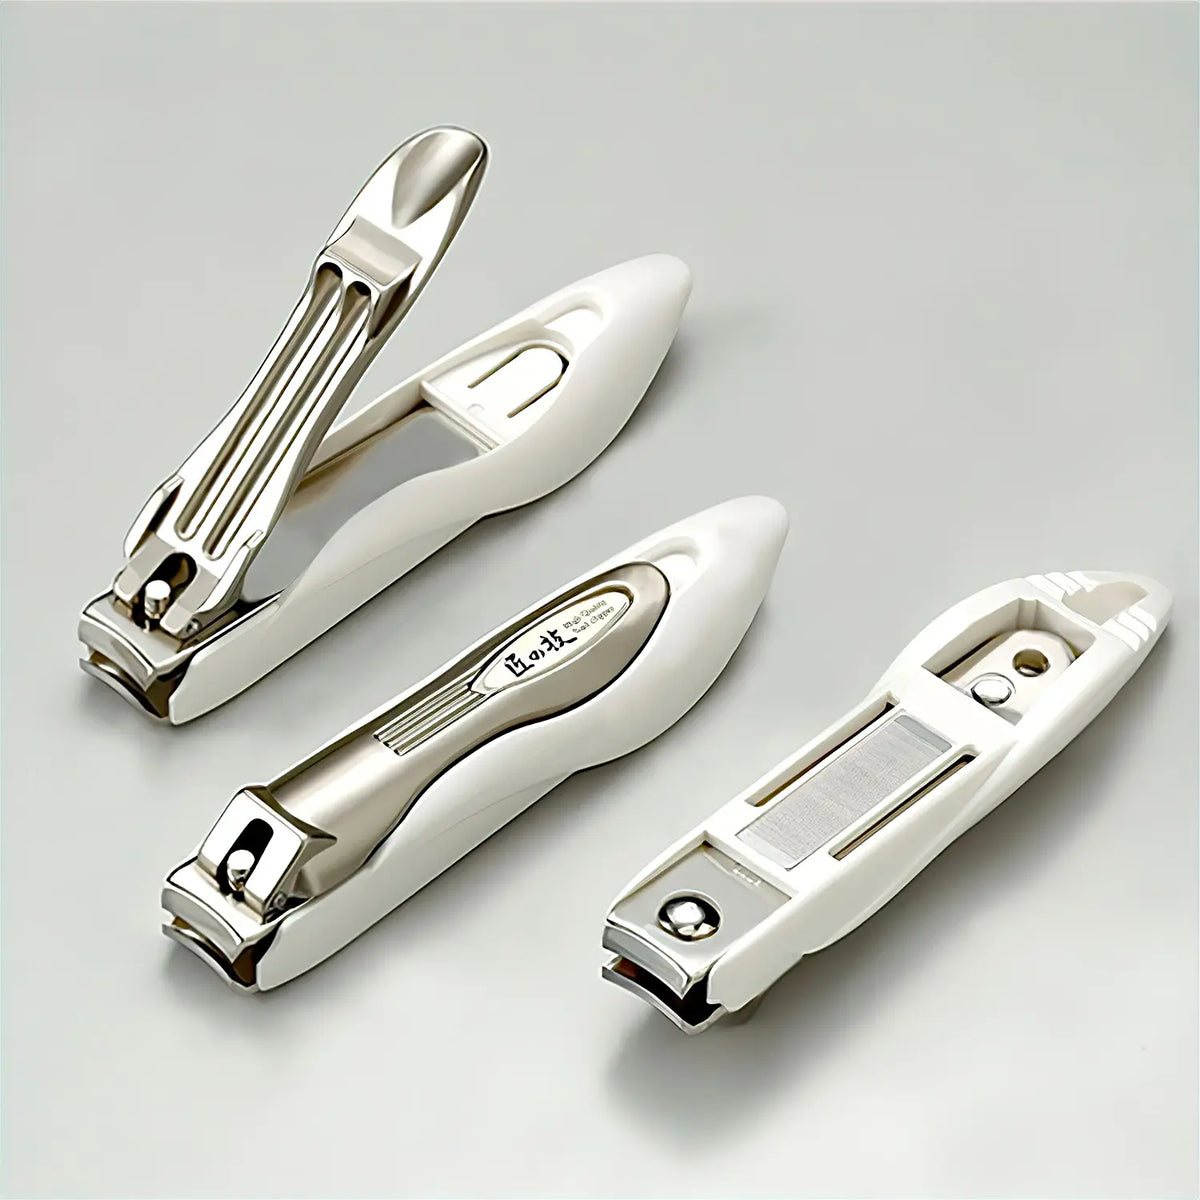 Fascinating Bell Stainless Steel Nail Cutter pack of 3 - Price in India,  Buy Fascinating Bell Stainless Steel Nail Cutter pack of 3 Online In India,  Reviews, Ratings & Features | Flipkart.com